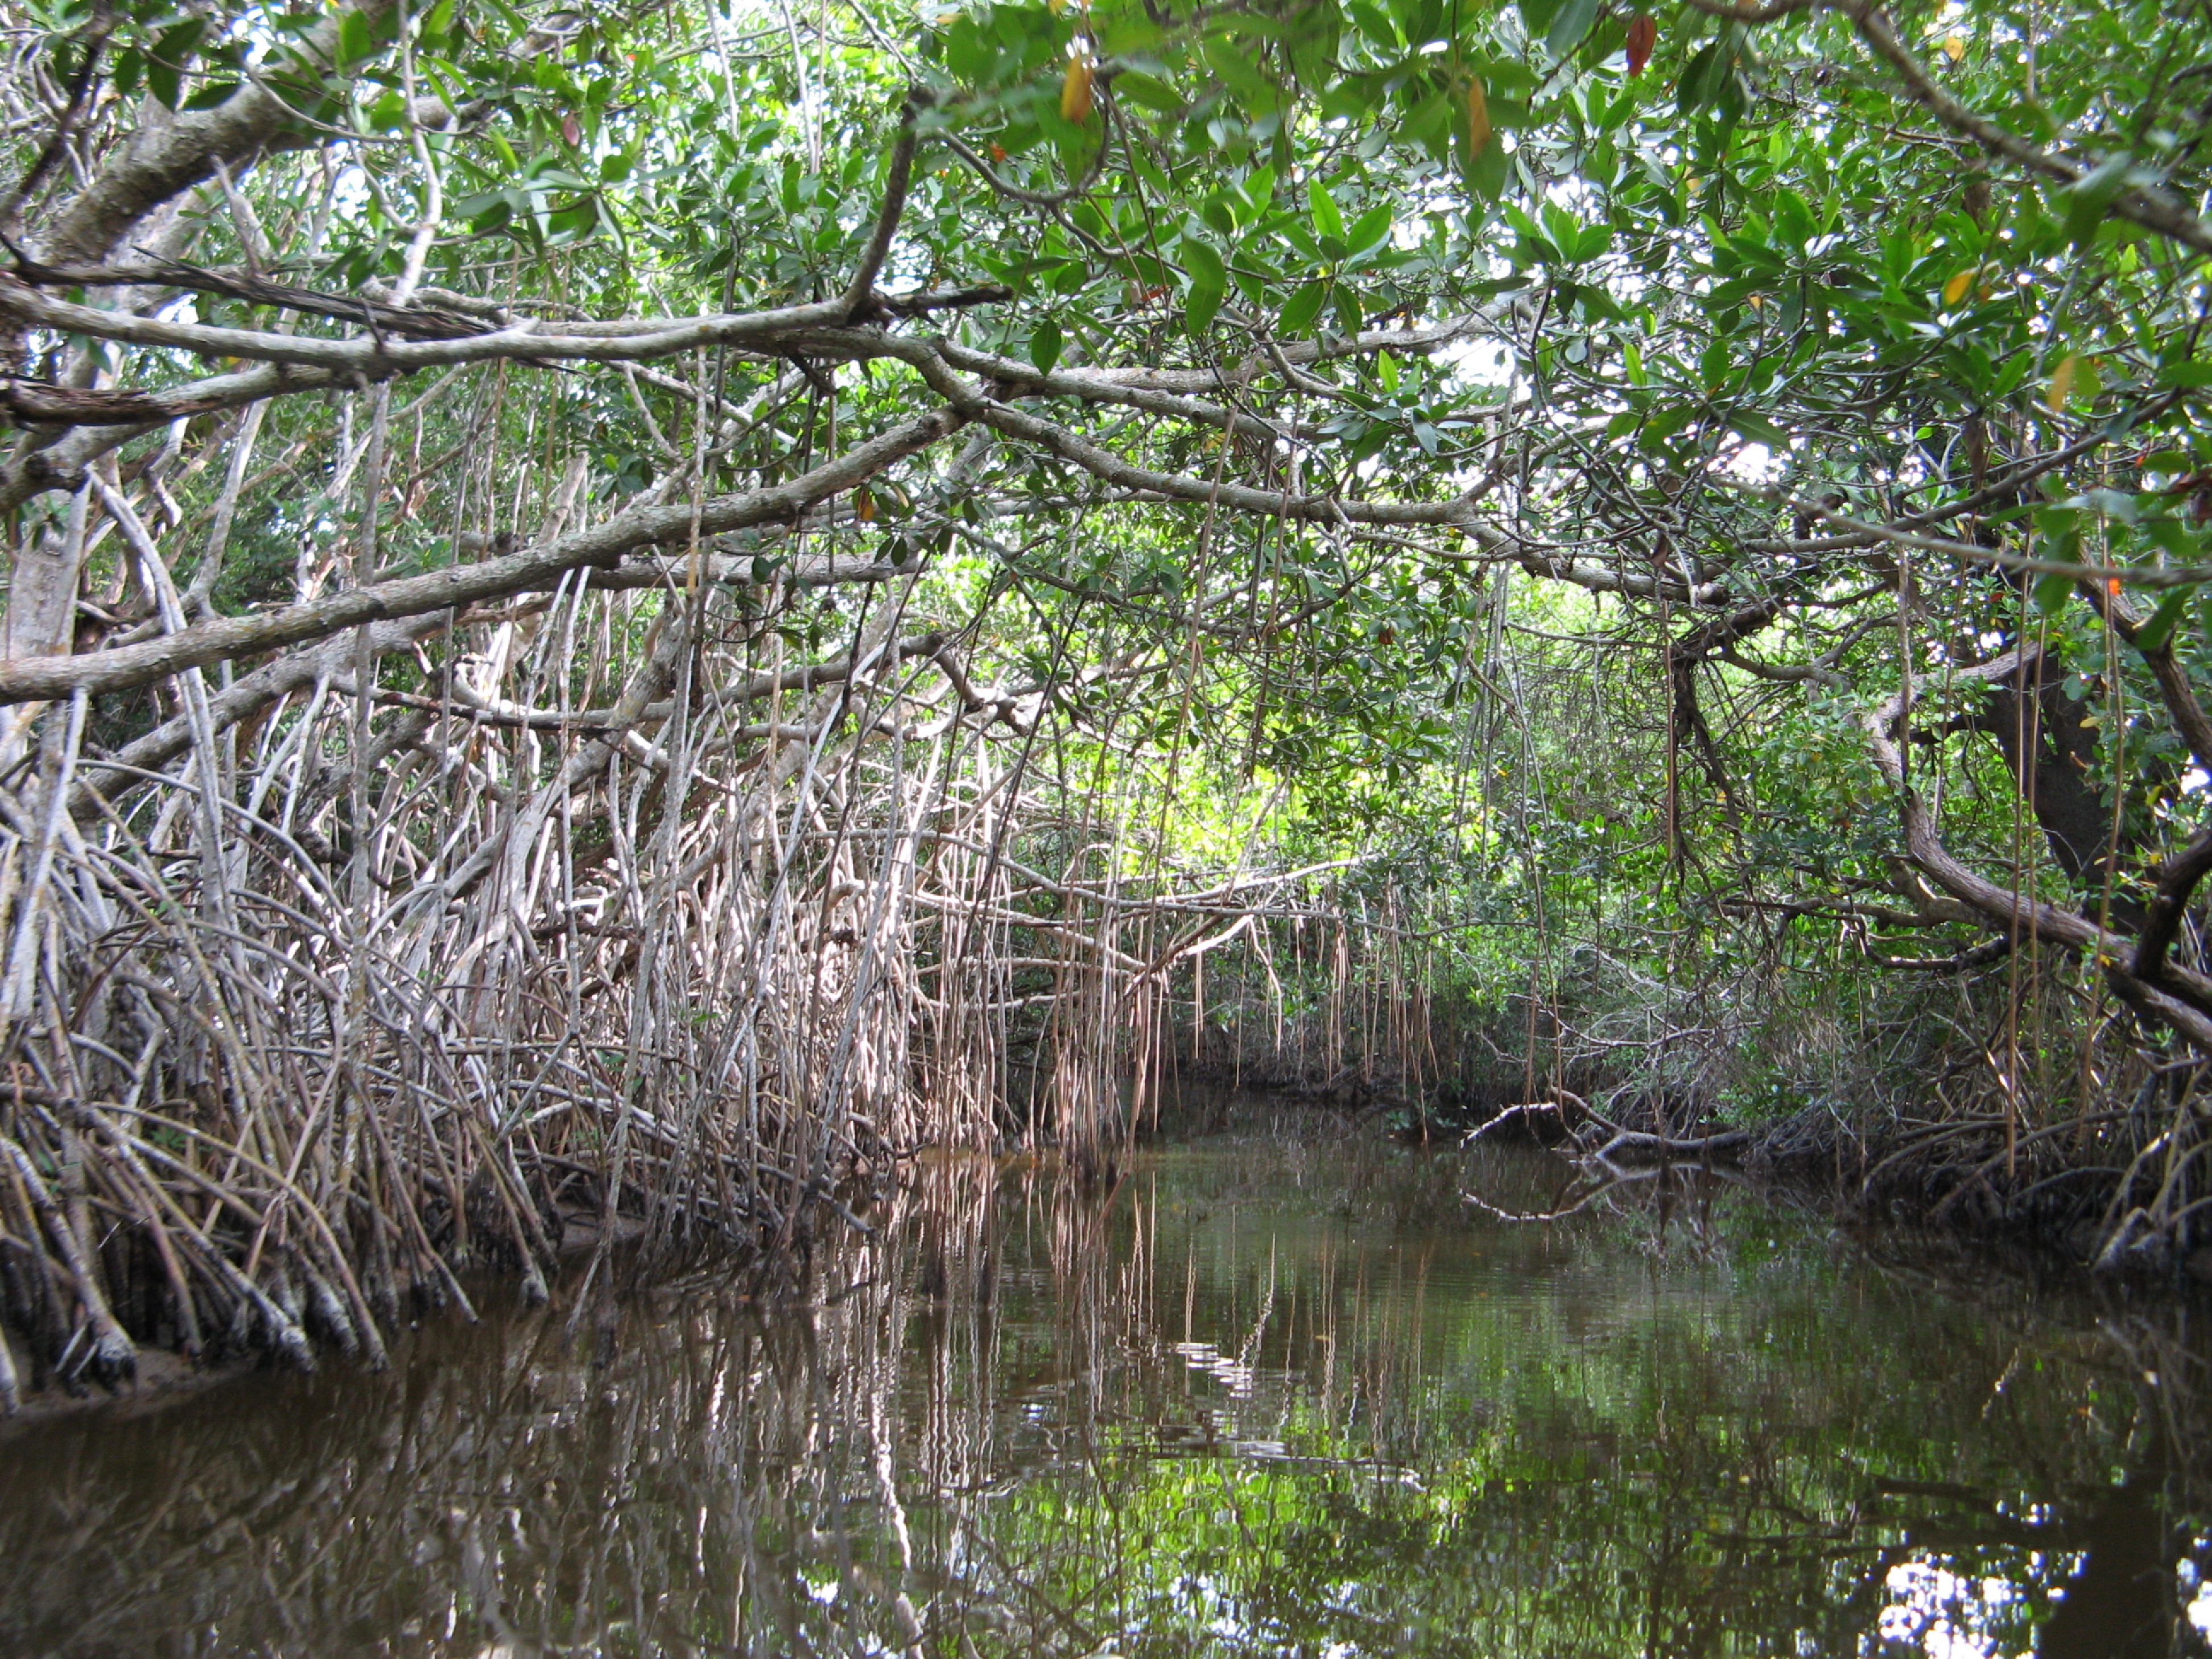 Mangroves in Taylor Slough